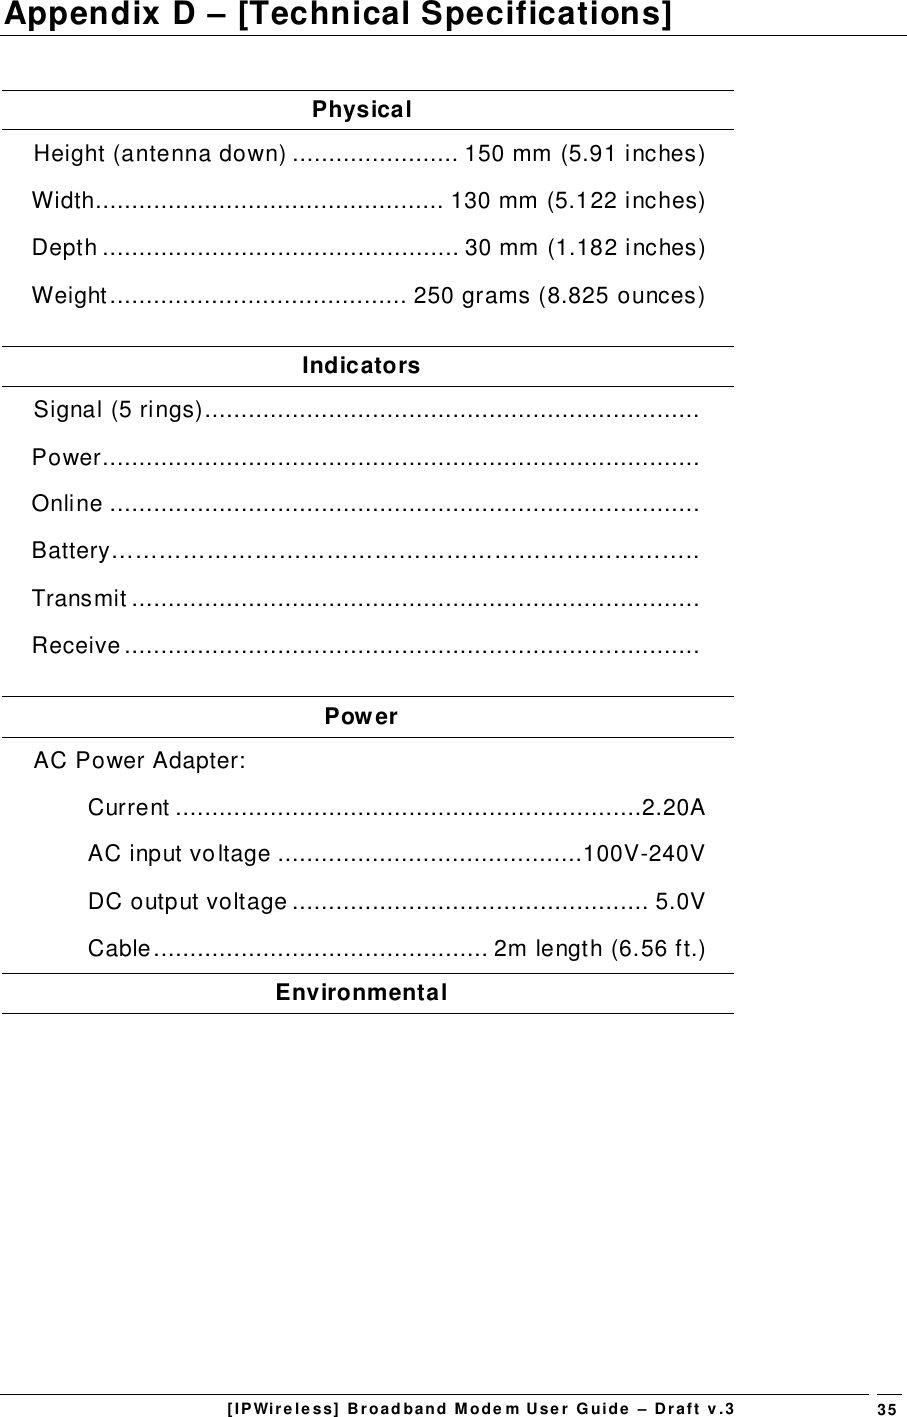 [IPWireless] Broadband Modem User Guide – Draft v.3 35Appendix D – [Technical Specifications]PhysicalHeight (antenna down) ....................... 150 mm (5.91 inches)Width................................................ 130 mm (5.122 inches)Depth ................................................. 30 mm (1.182 inches)Weight......................................... 250 grams (8.825 ounces)IndicatorsSignal (5 rings)....................................................................Power..................................................................................Online .................................................................................Battery………………………………………………………………..Transmit ..............................................................................Receive...............................................................................PowerAC Power Adapter:Current ................................................................2.20AAC input voltage ..........................................100V-240VDC output voltage ................................................. 5.0VCable.............................................. 2m length (6.56 ft.)Environmental